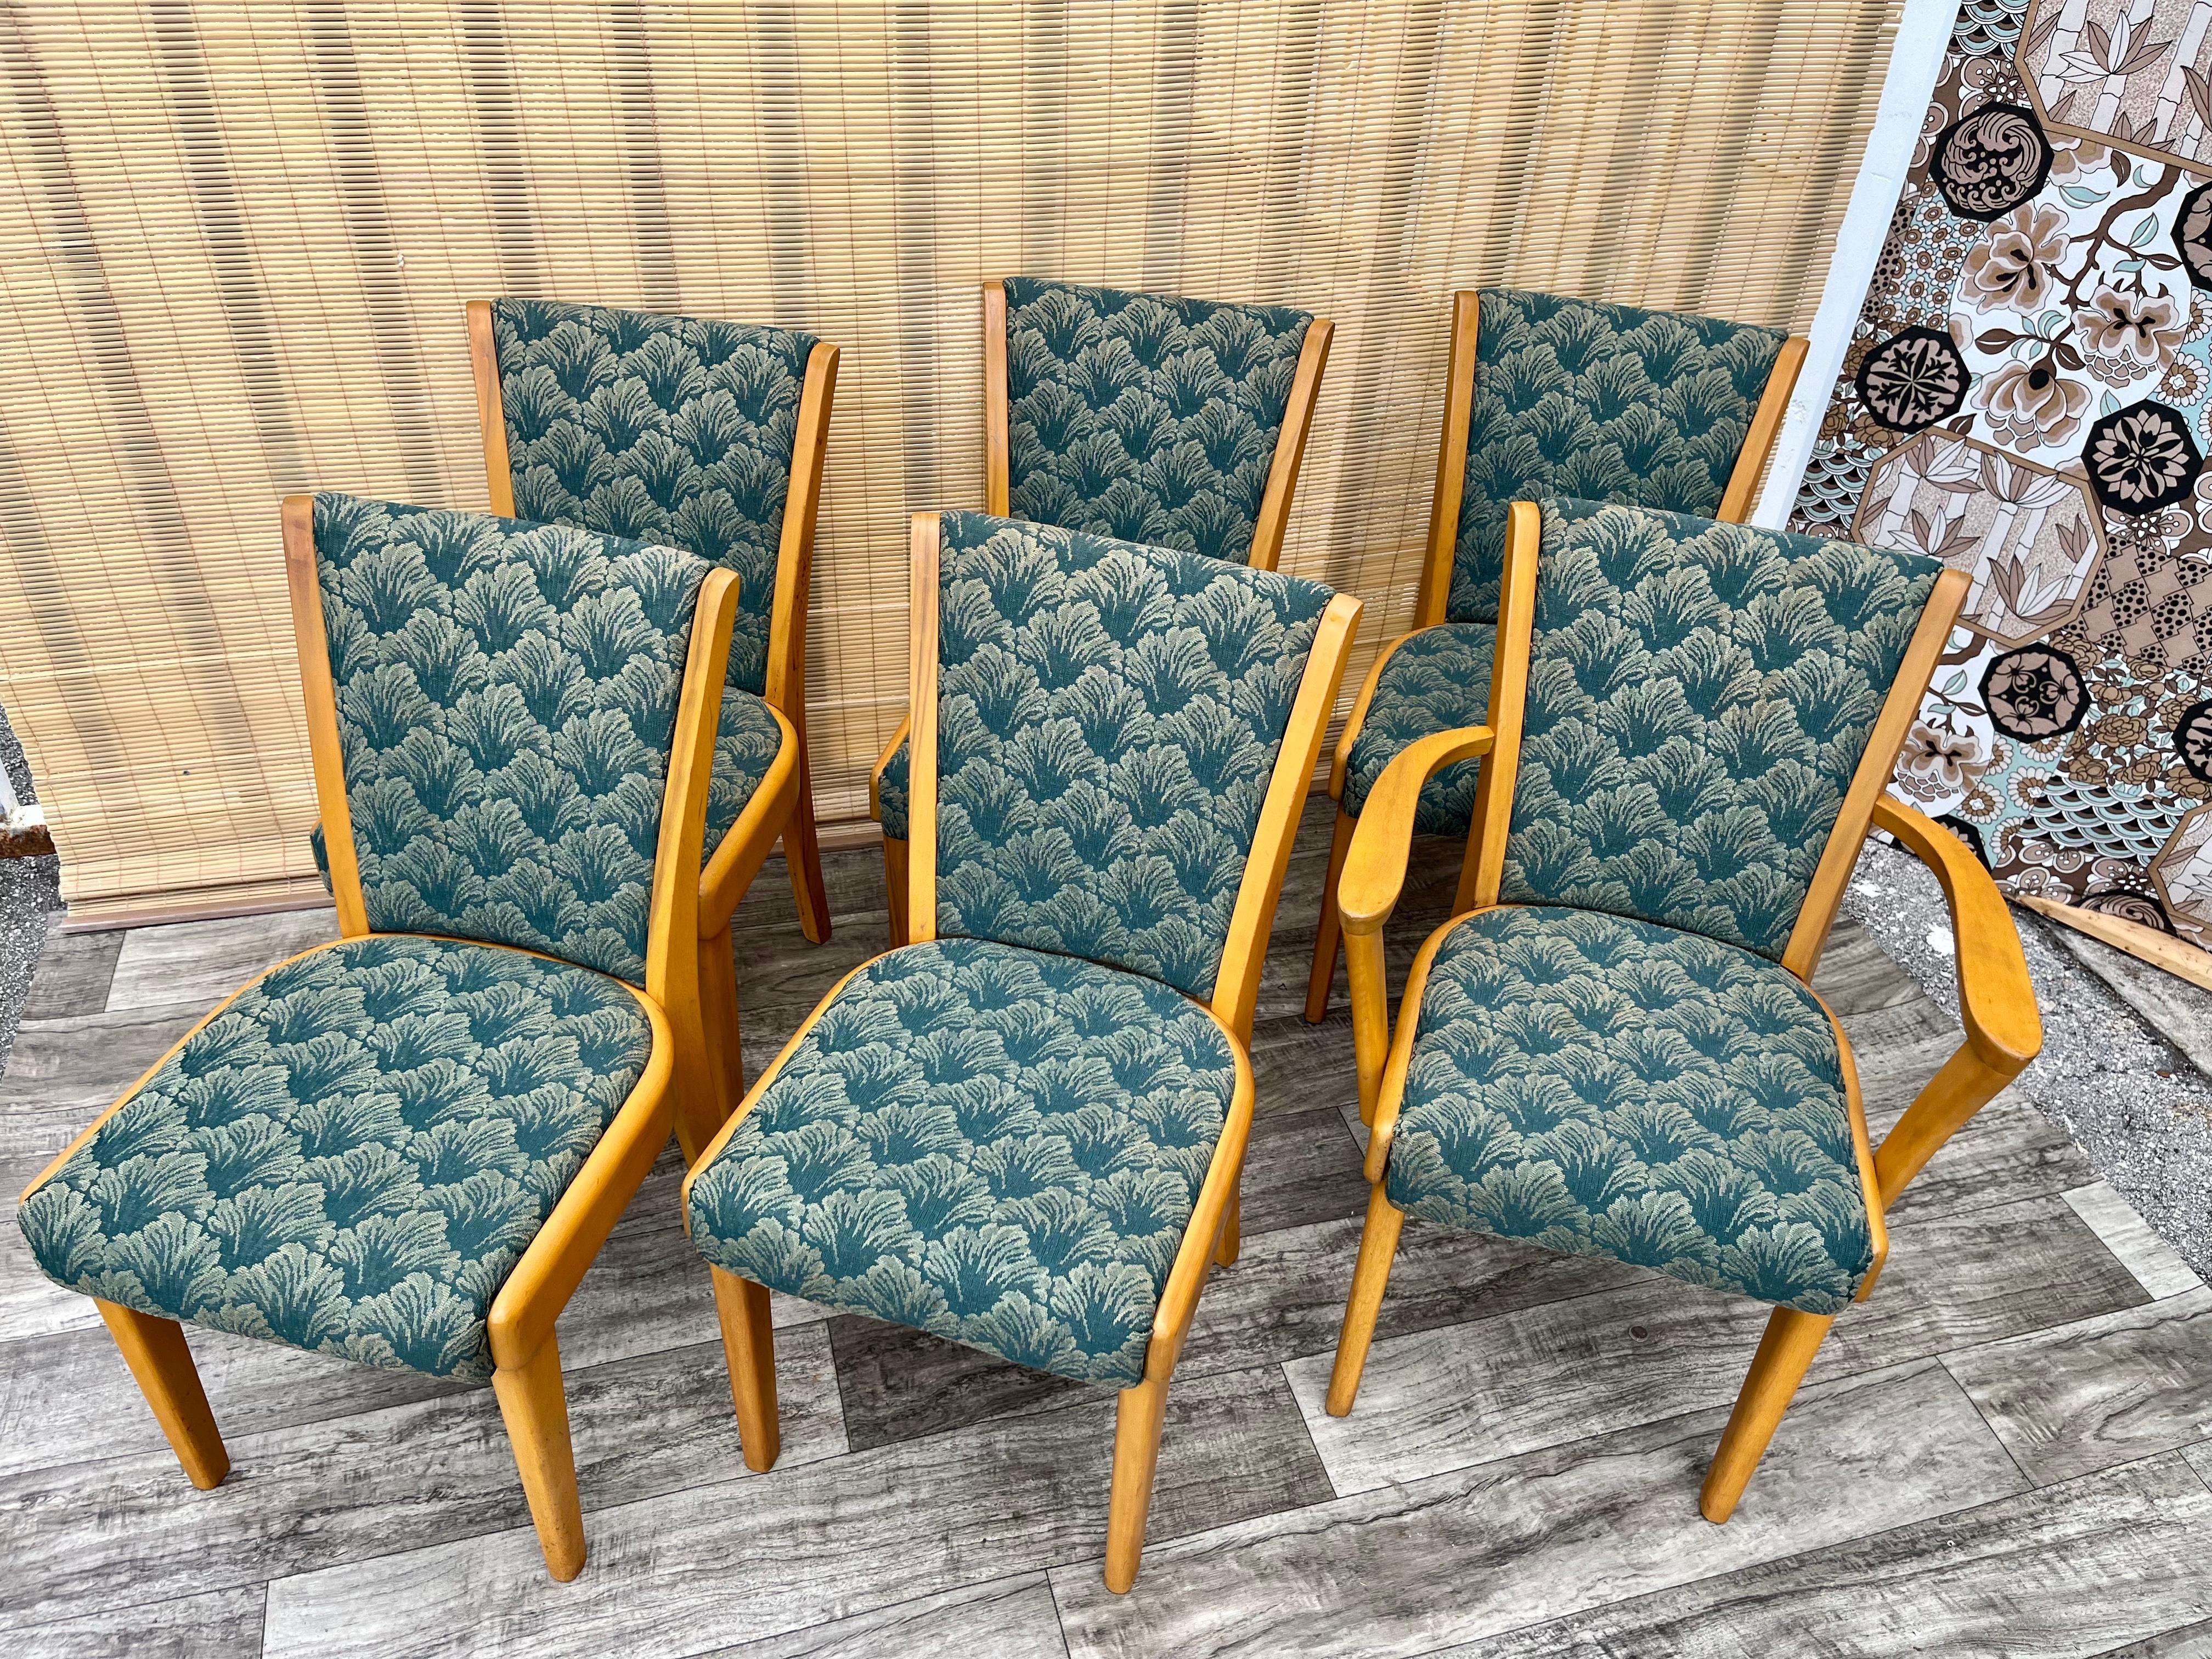 Set of 6 Mid Century Modern Heywood Wakefield Dining Chairs. Circa 1950s
Five side chairs and one captain chair.  
Good solid condition with age appropriate wear. The upholstery is also in good vintage condition with some signs of wear consistent